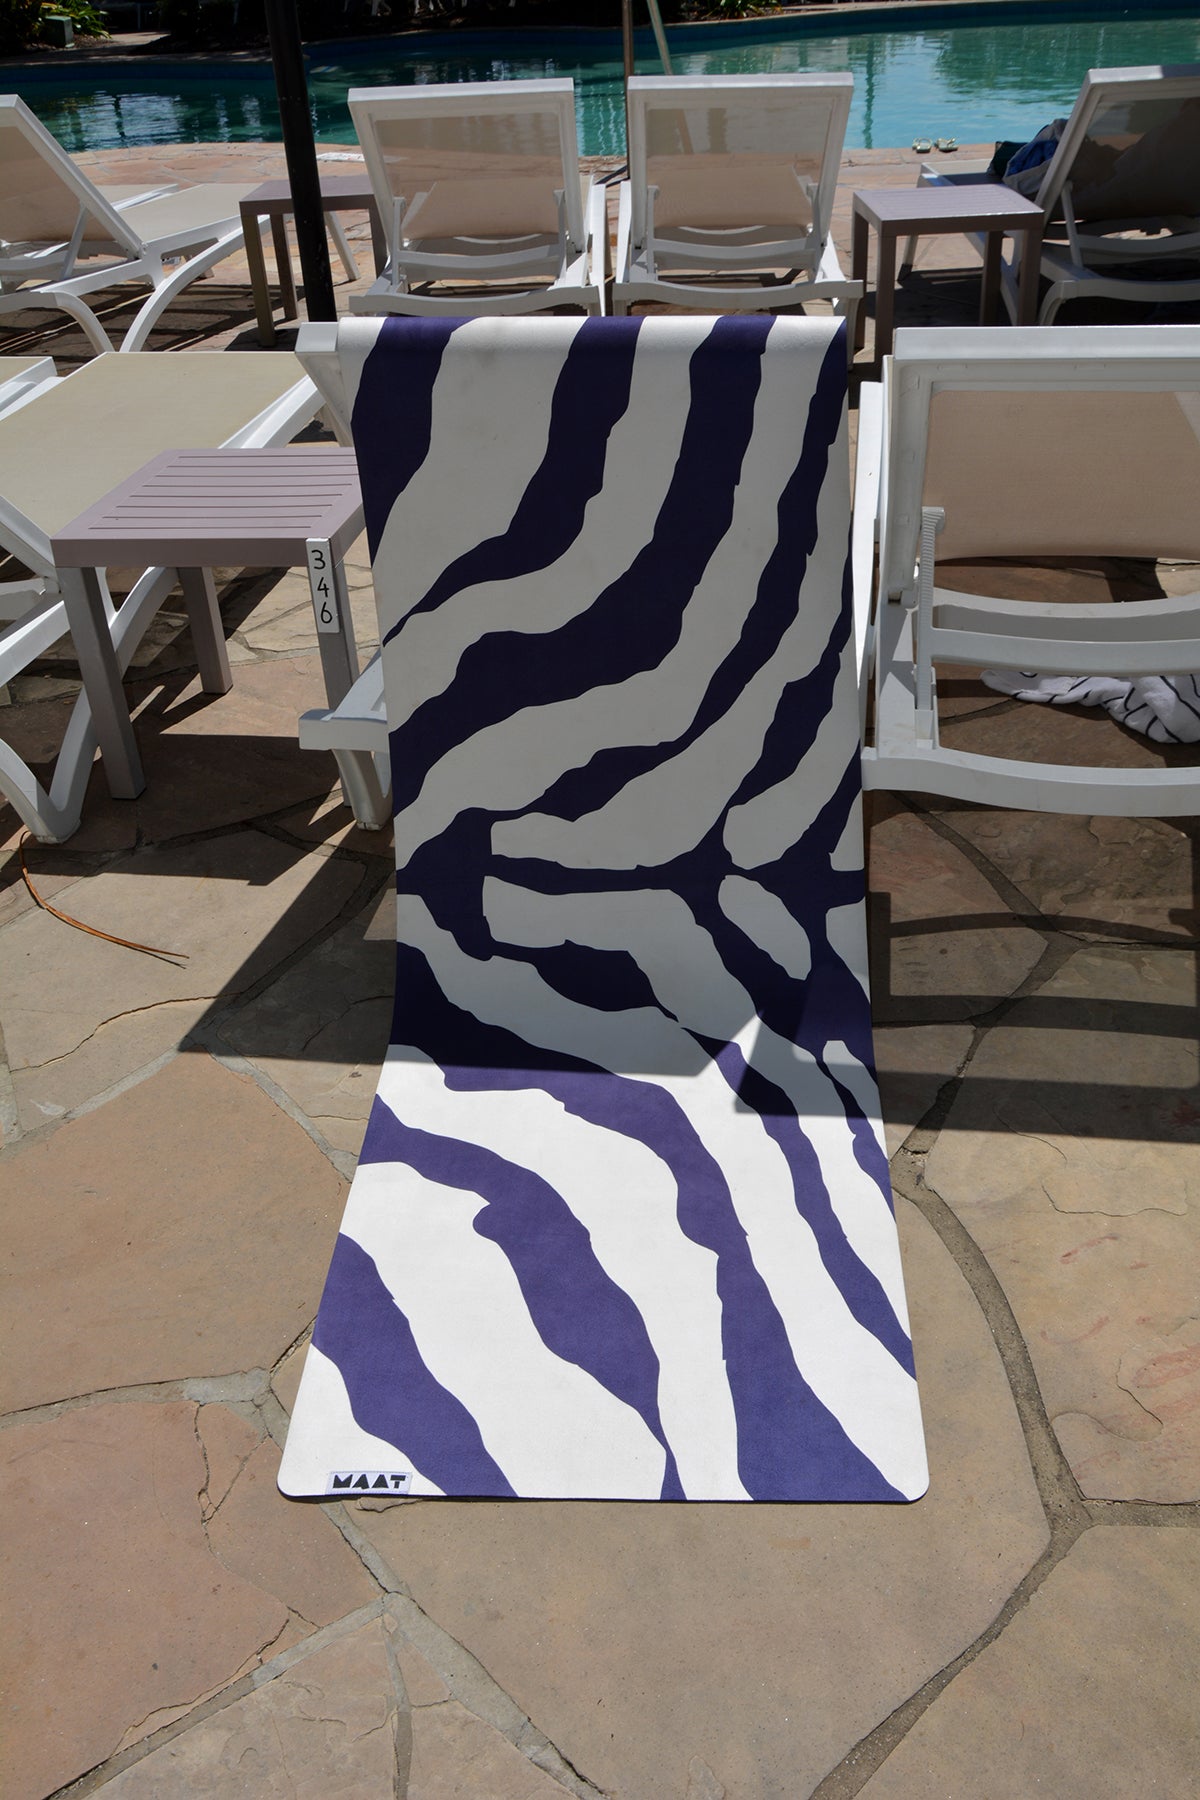 Yoga mat draped on the back of a pool chair